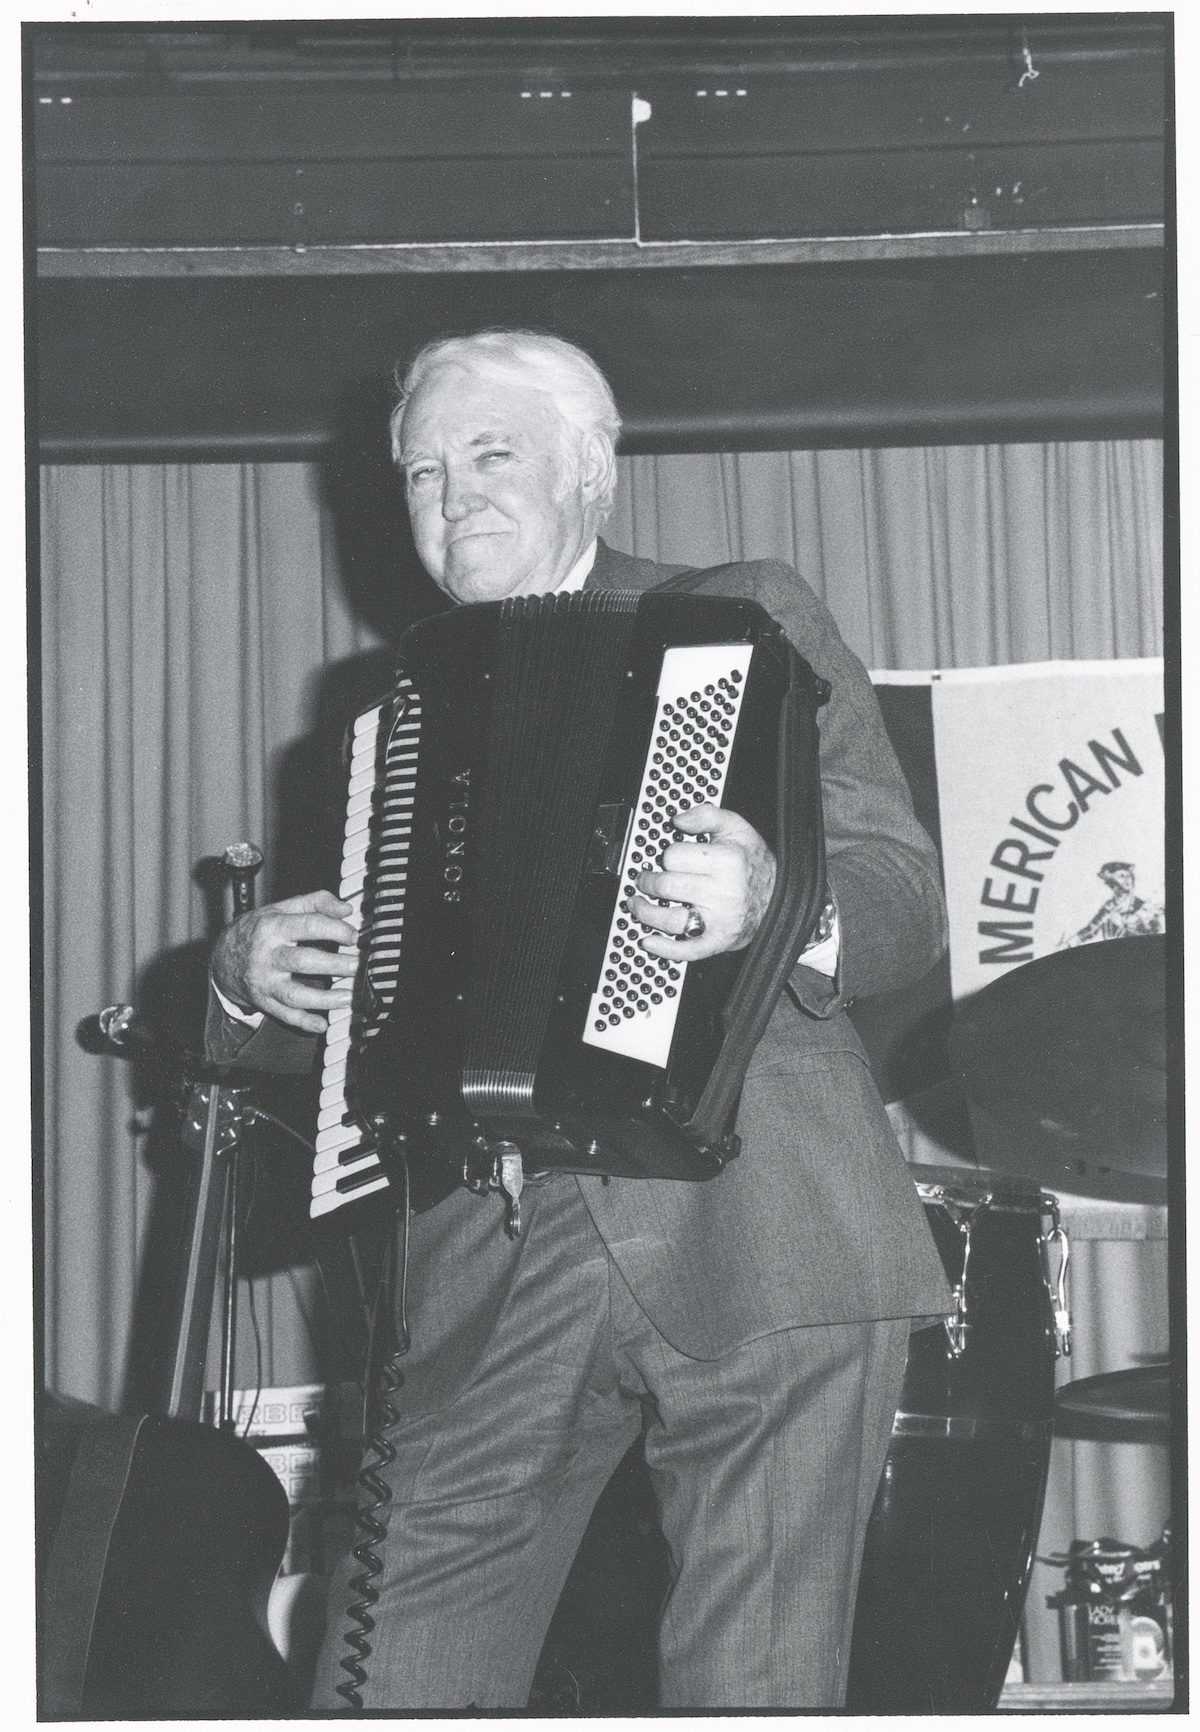 Mr. Coyle plays the accordion